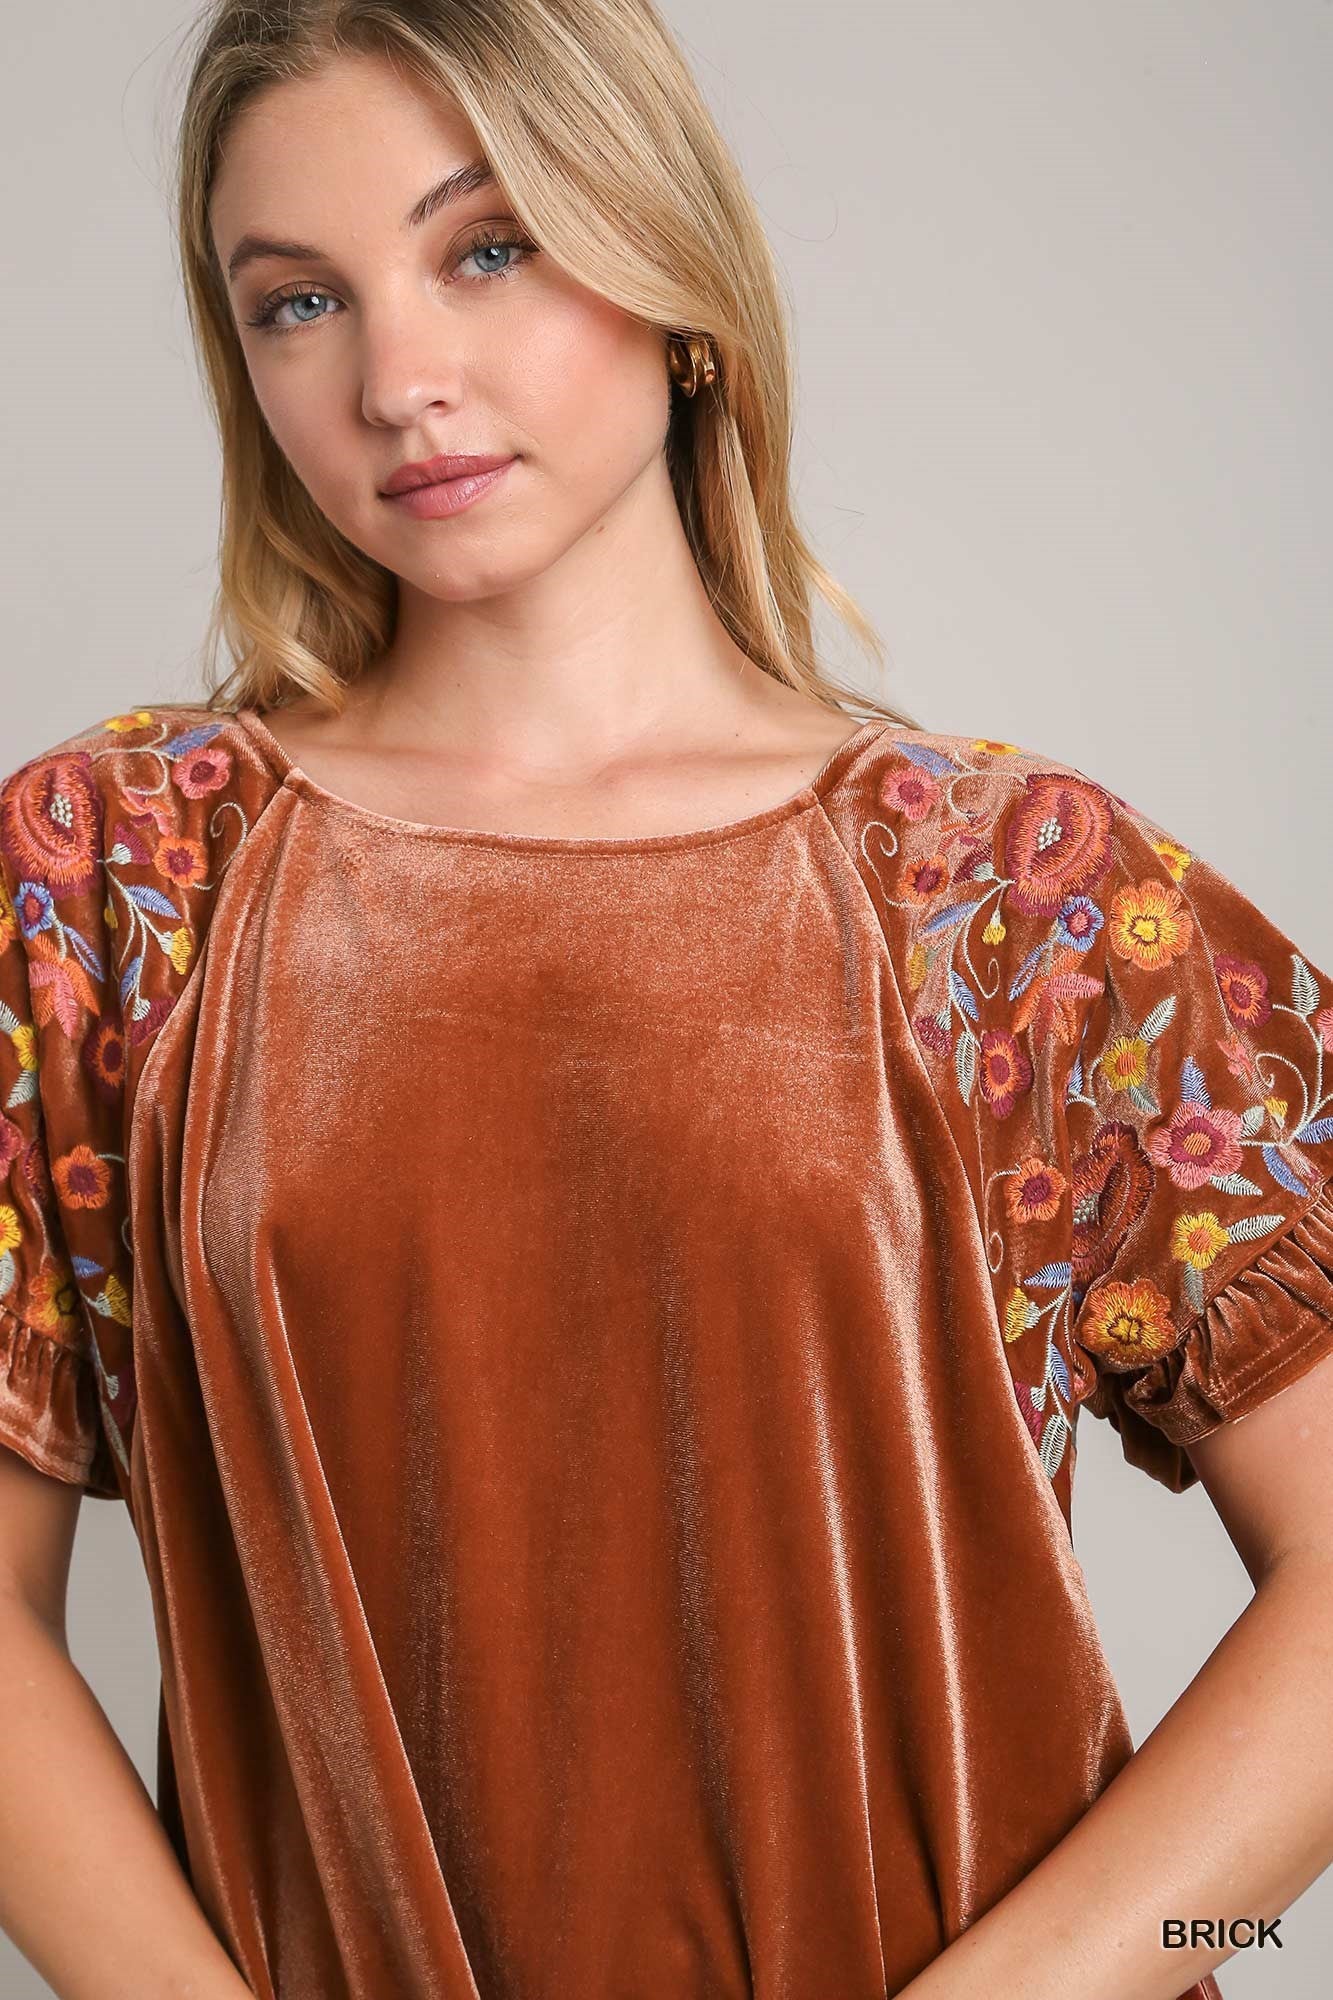 Brick Velvet Top w/ Embroidered Ruffle Sleeves